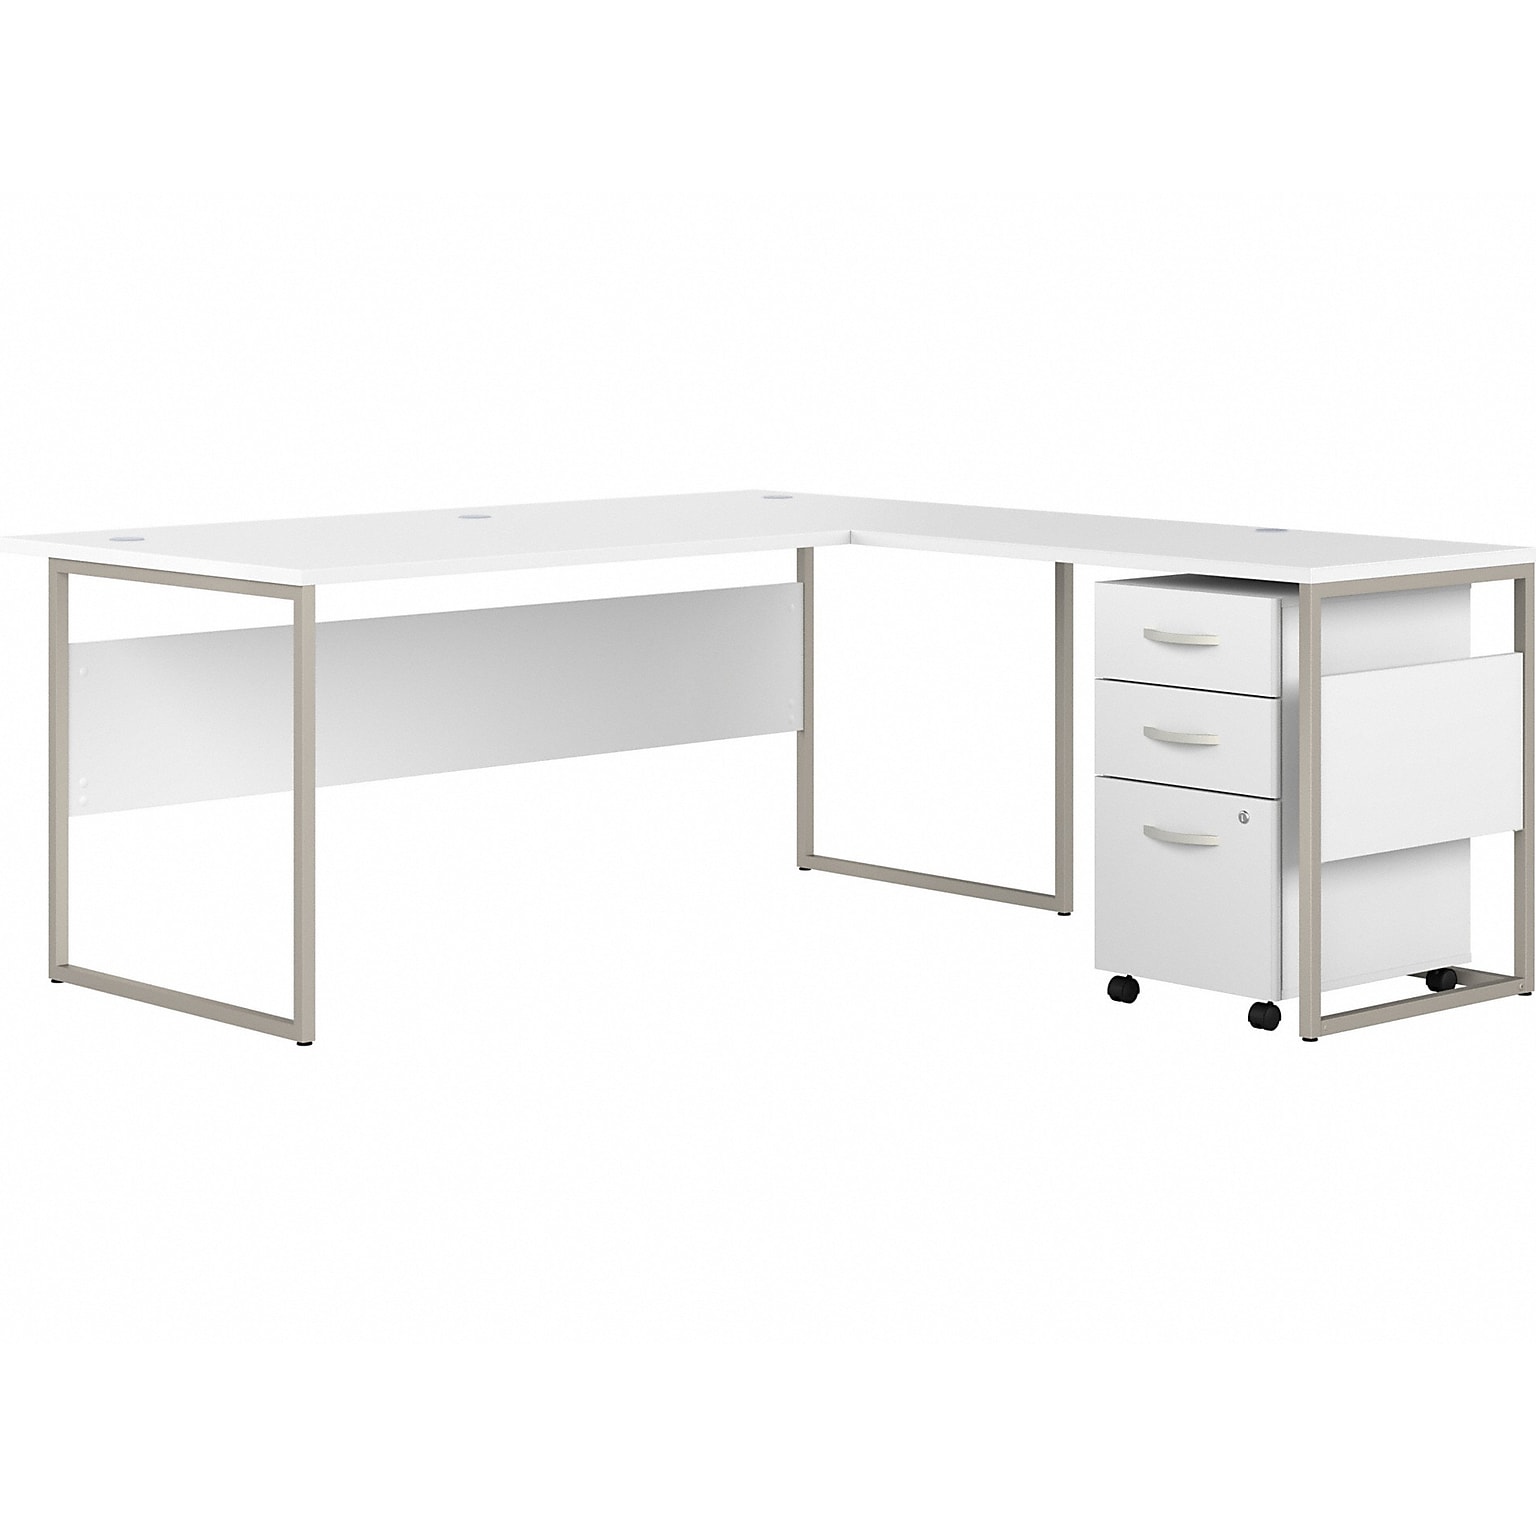 Bush Business Furniture Hybrid 72W L Shaped Table Desk with 3 Drawer Mobile File Cabinet, White (HYB010WHSU)